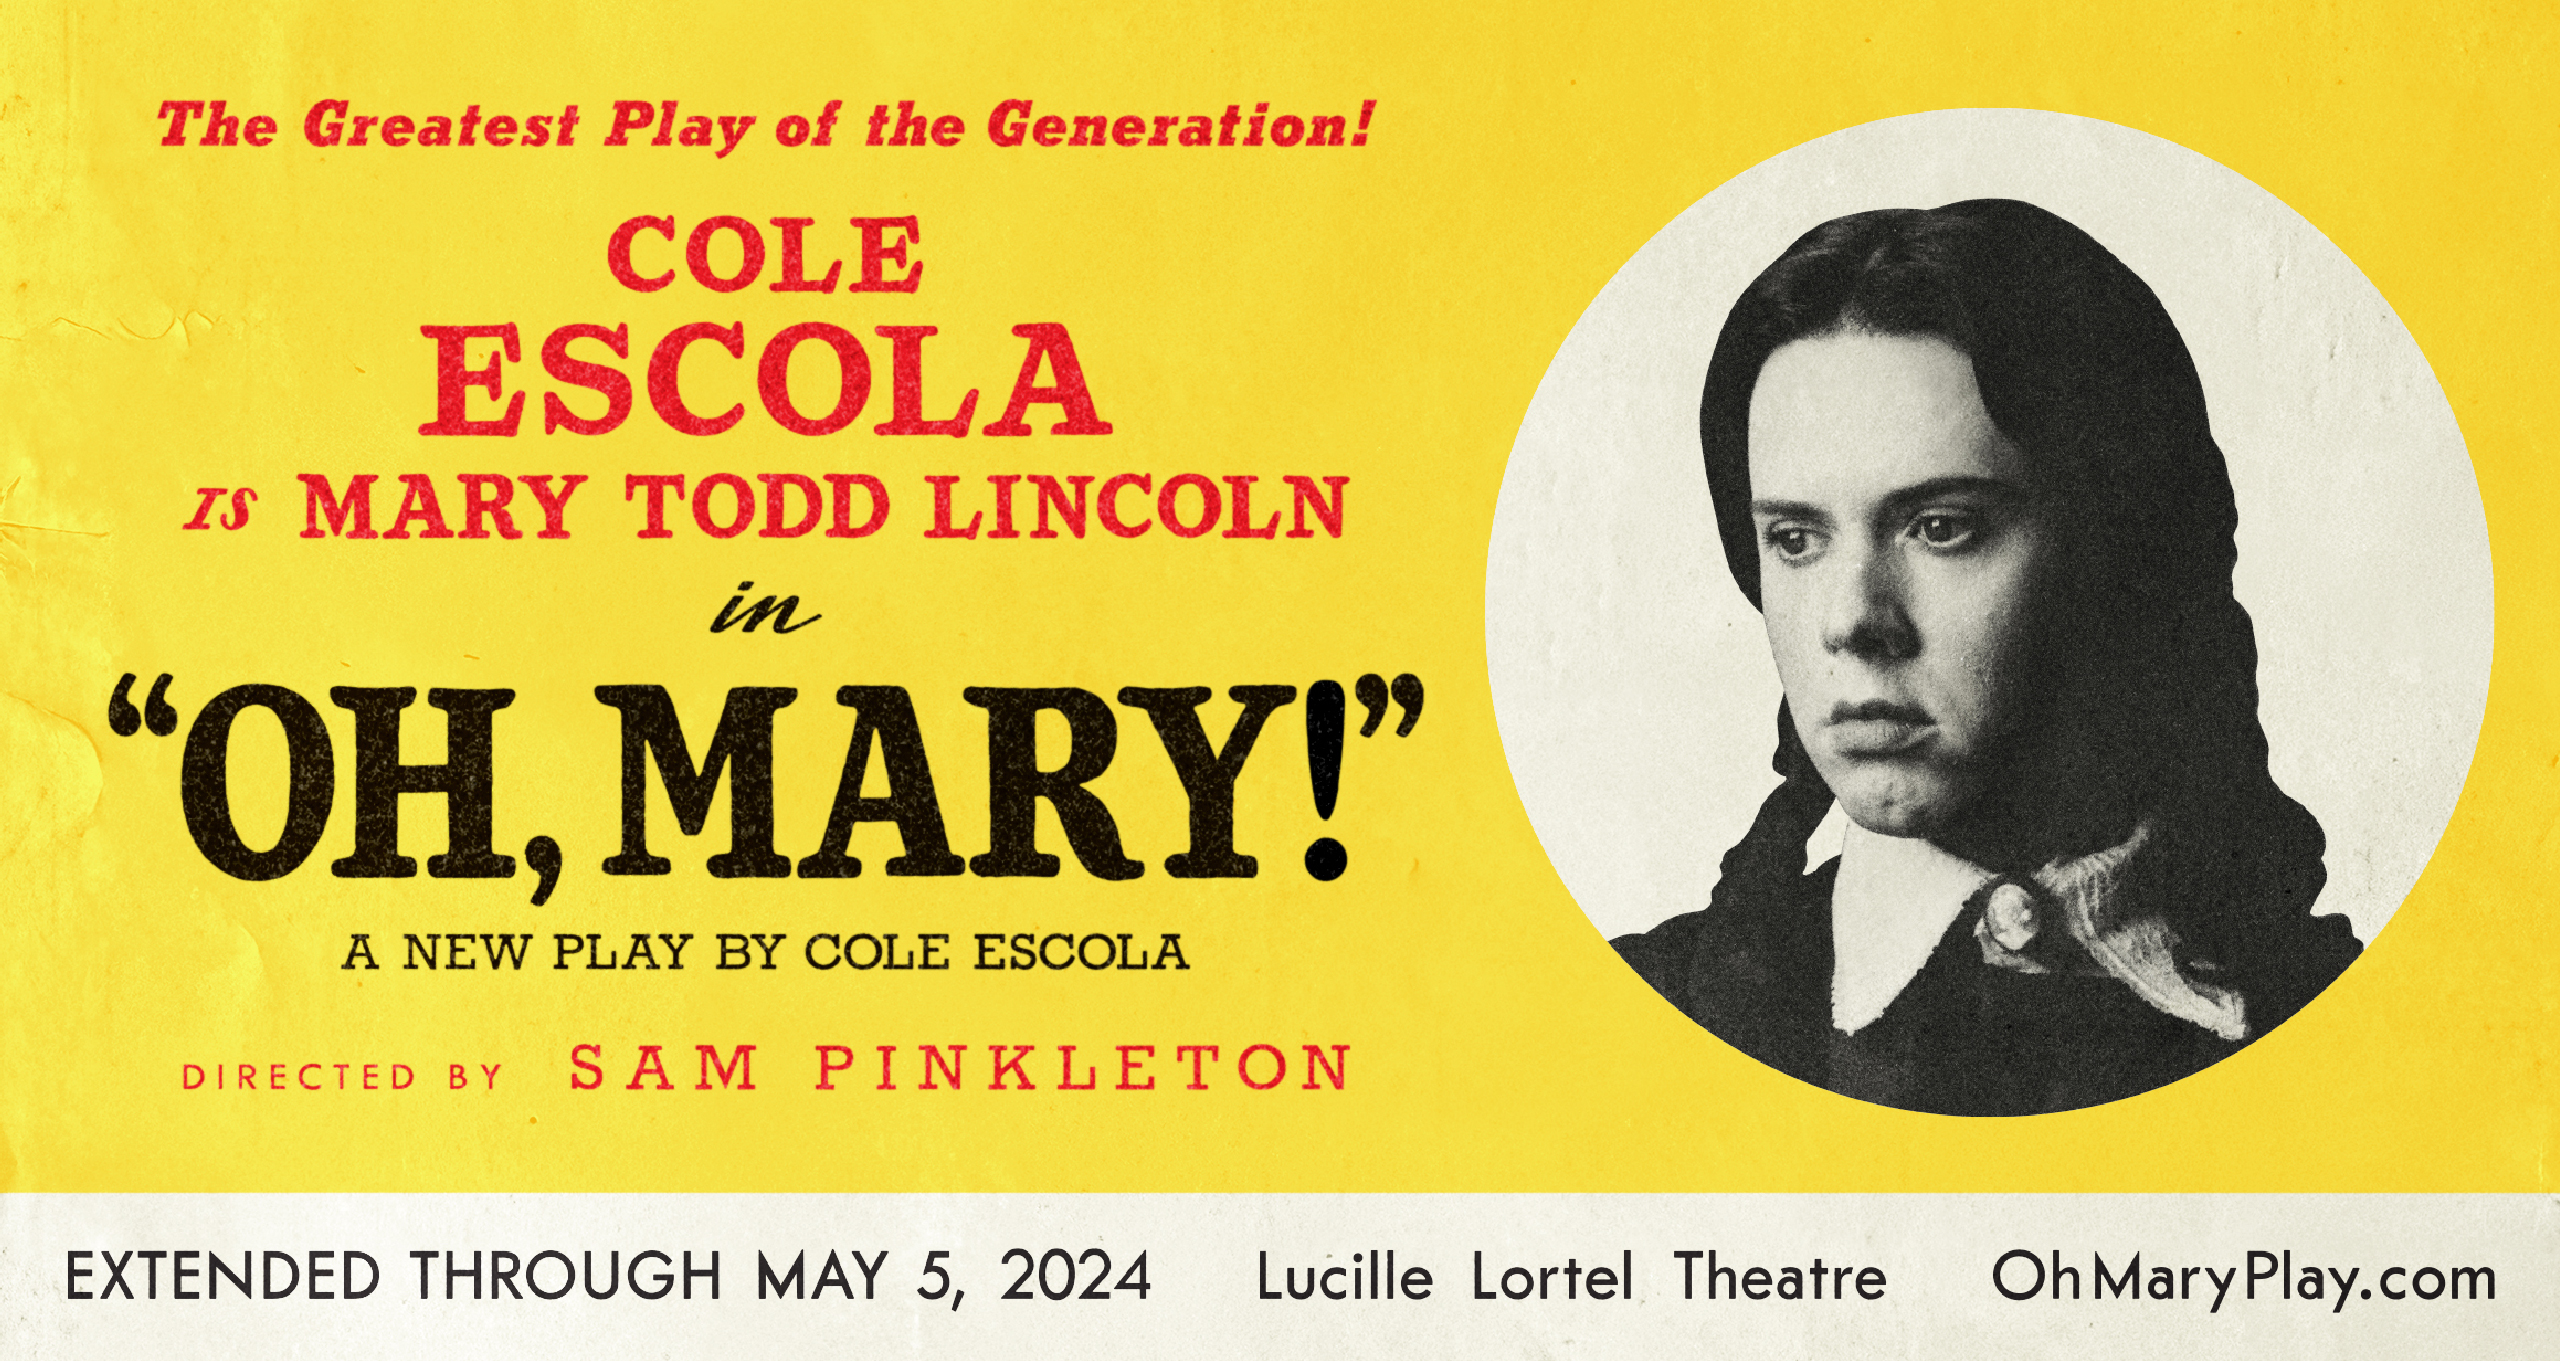 Oh Mary! has been extended until May 5th at the Lucille Lortel Theatre